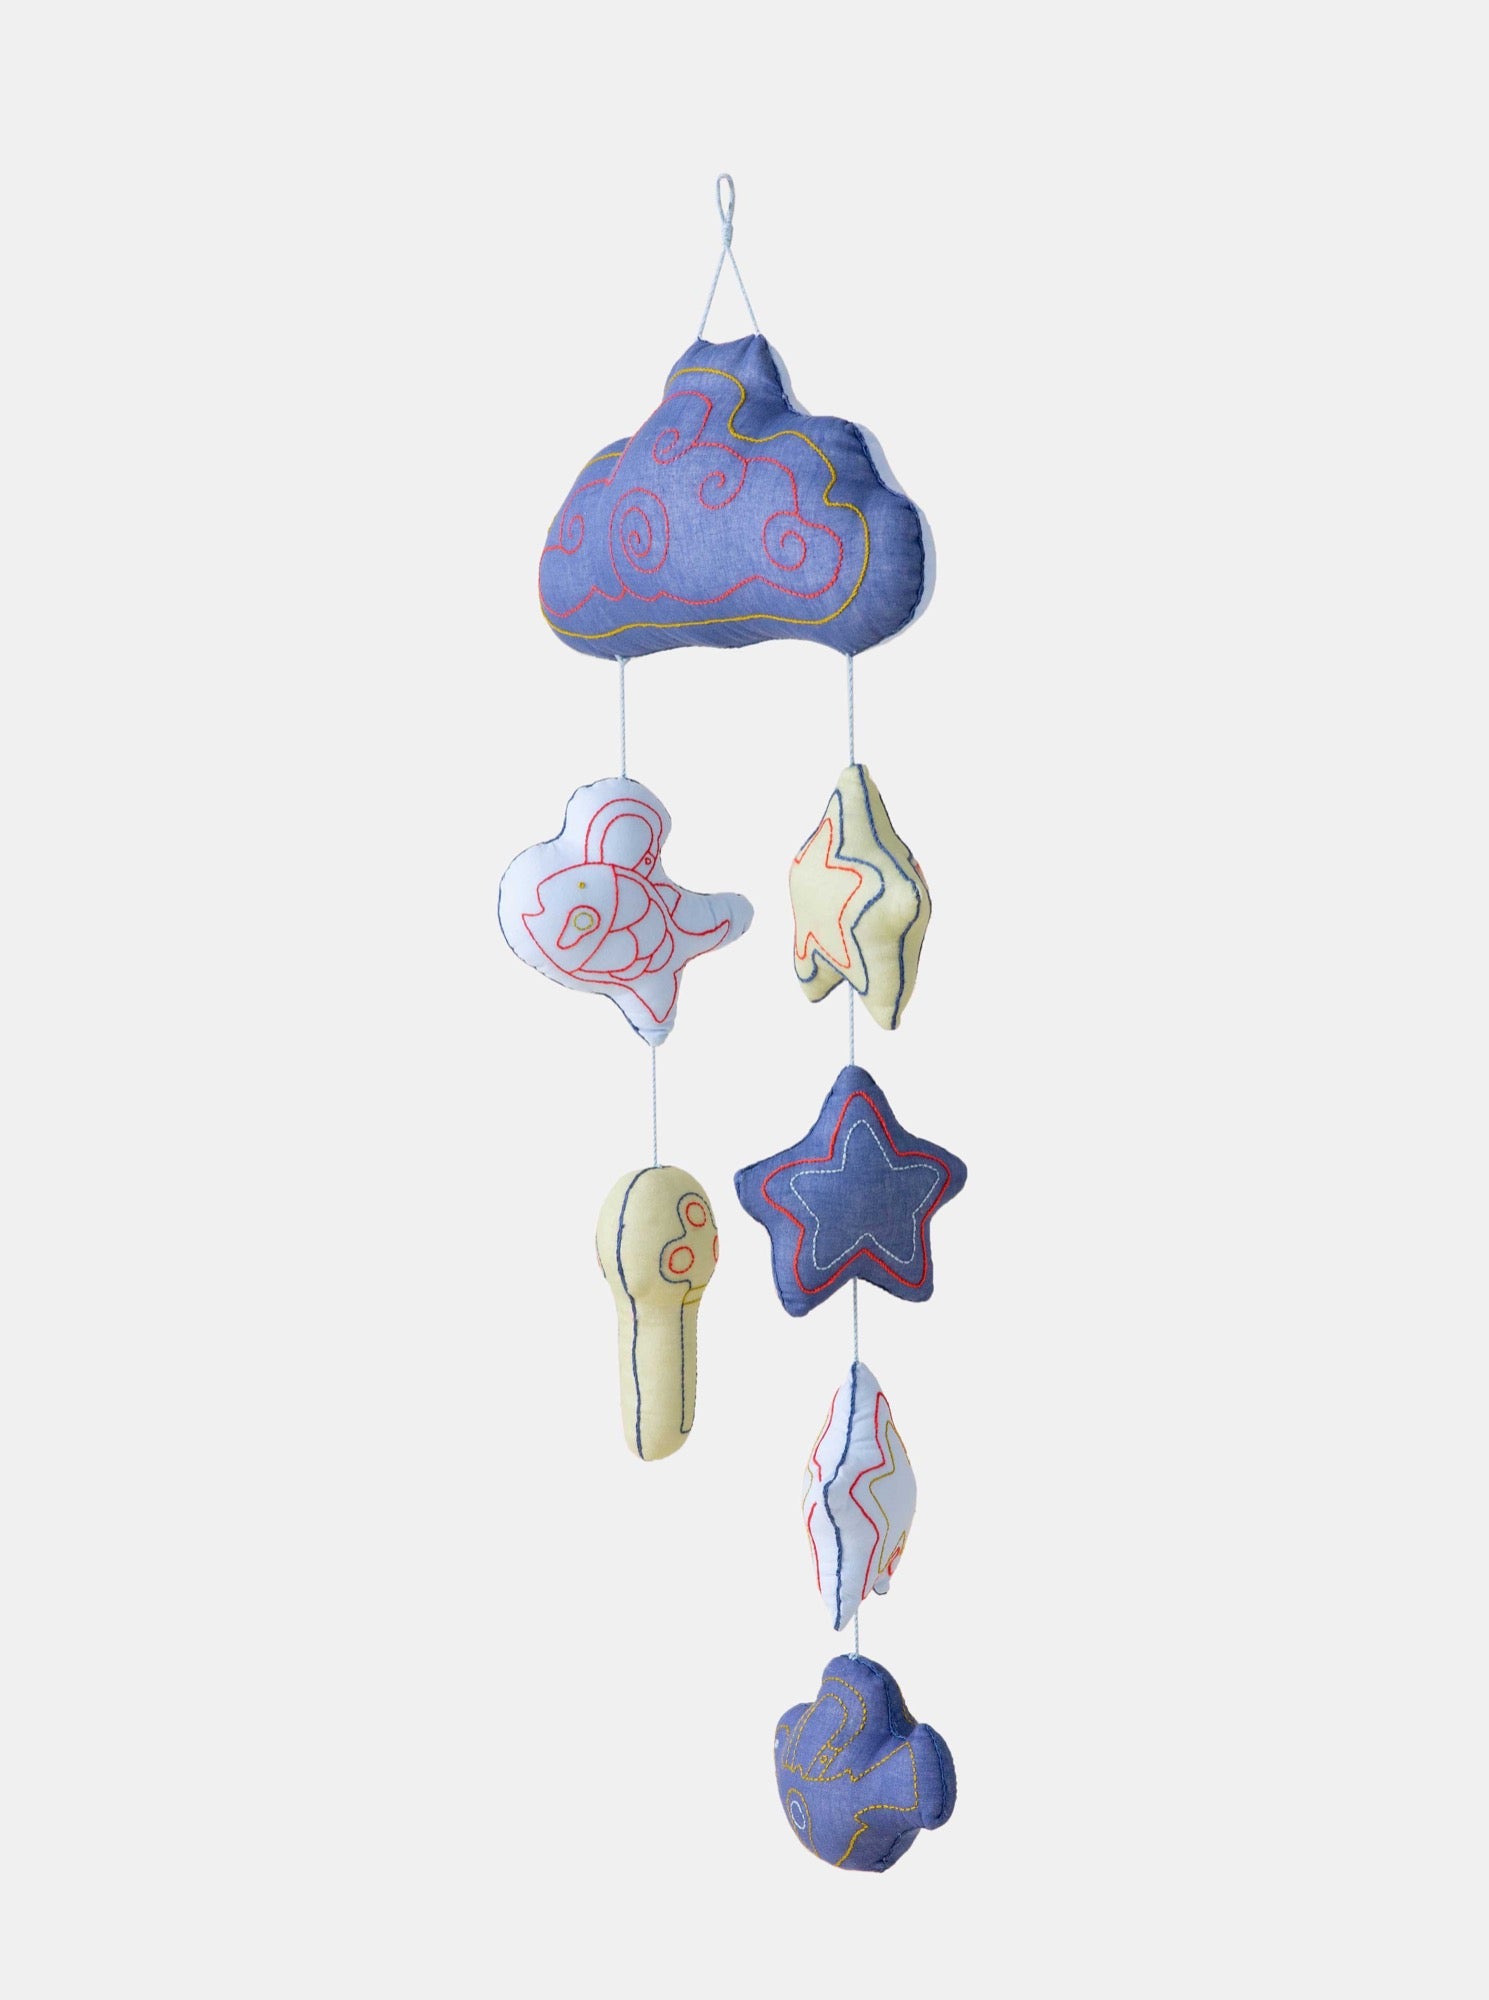 Blue Lucky Charm baby mobile hanging from ceiling